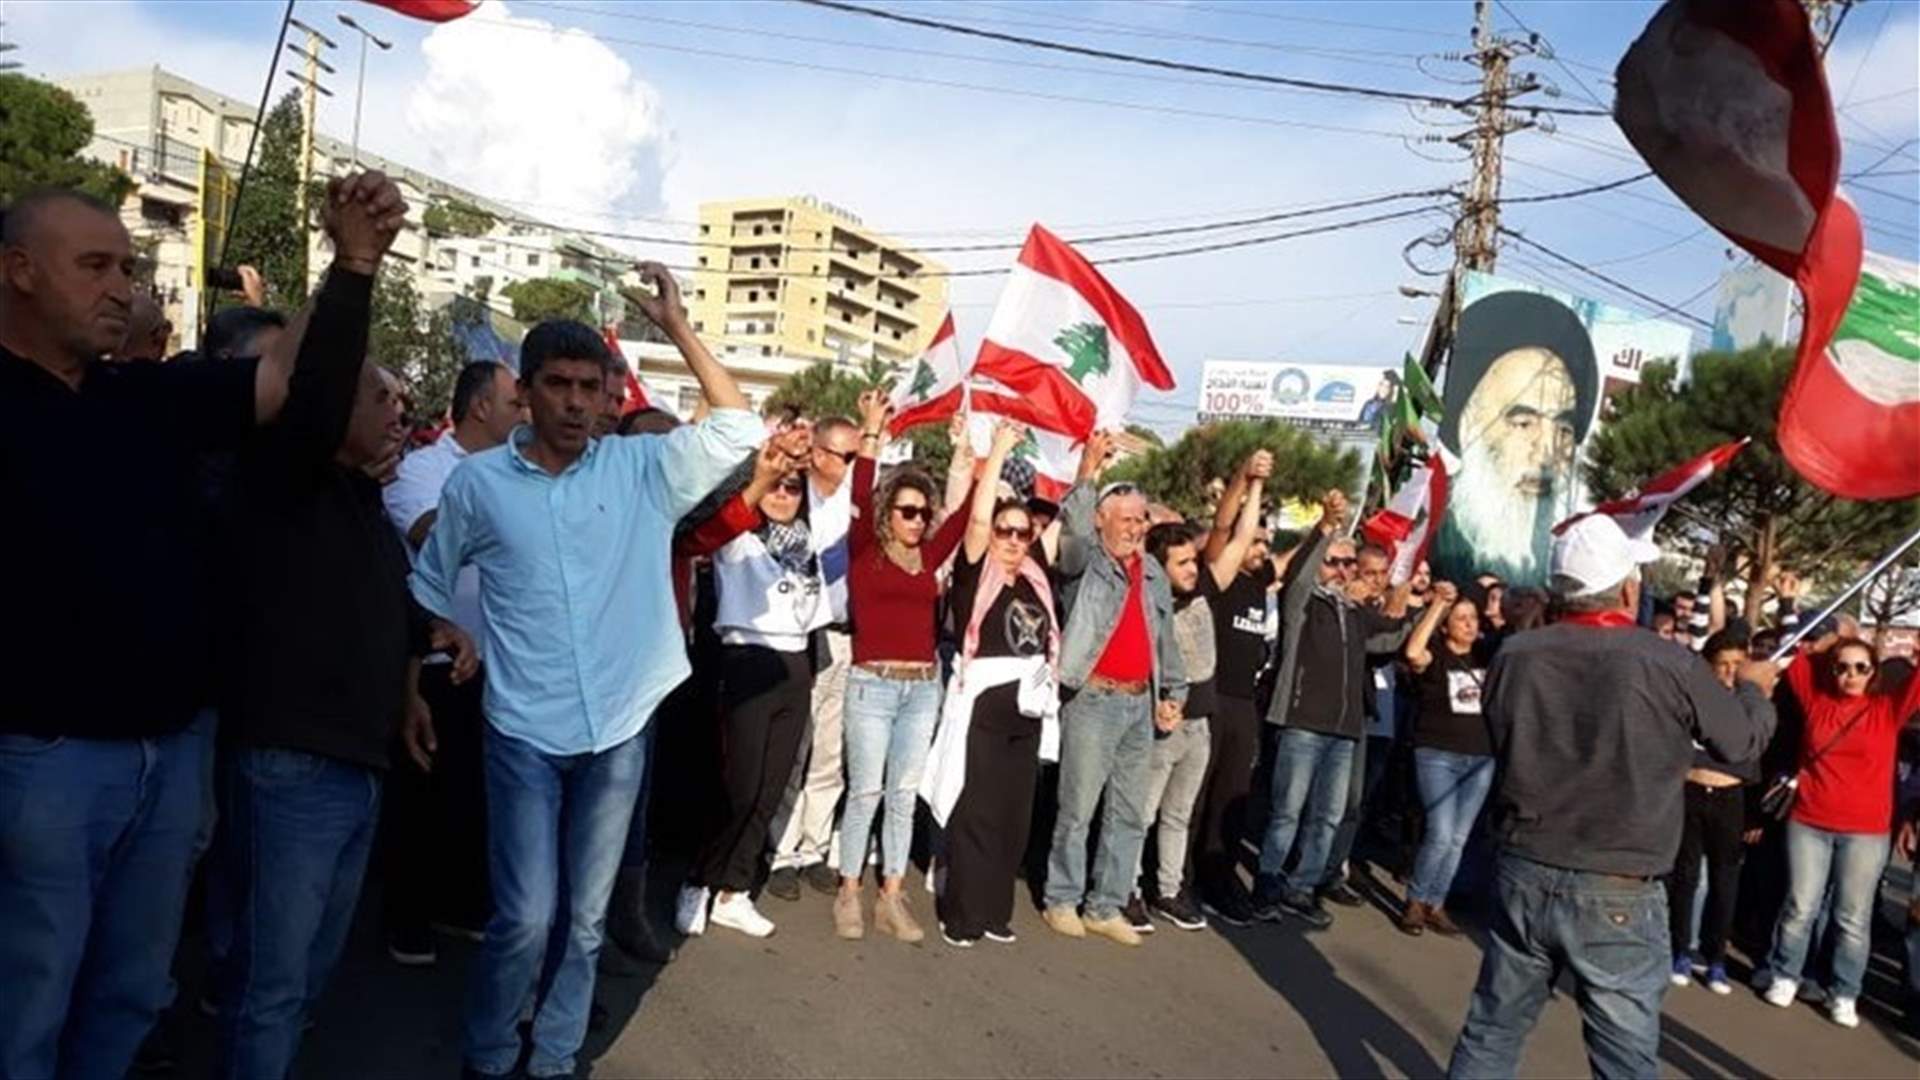 Protesters stage rally in Kfarreman